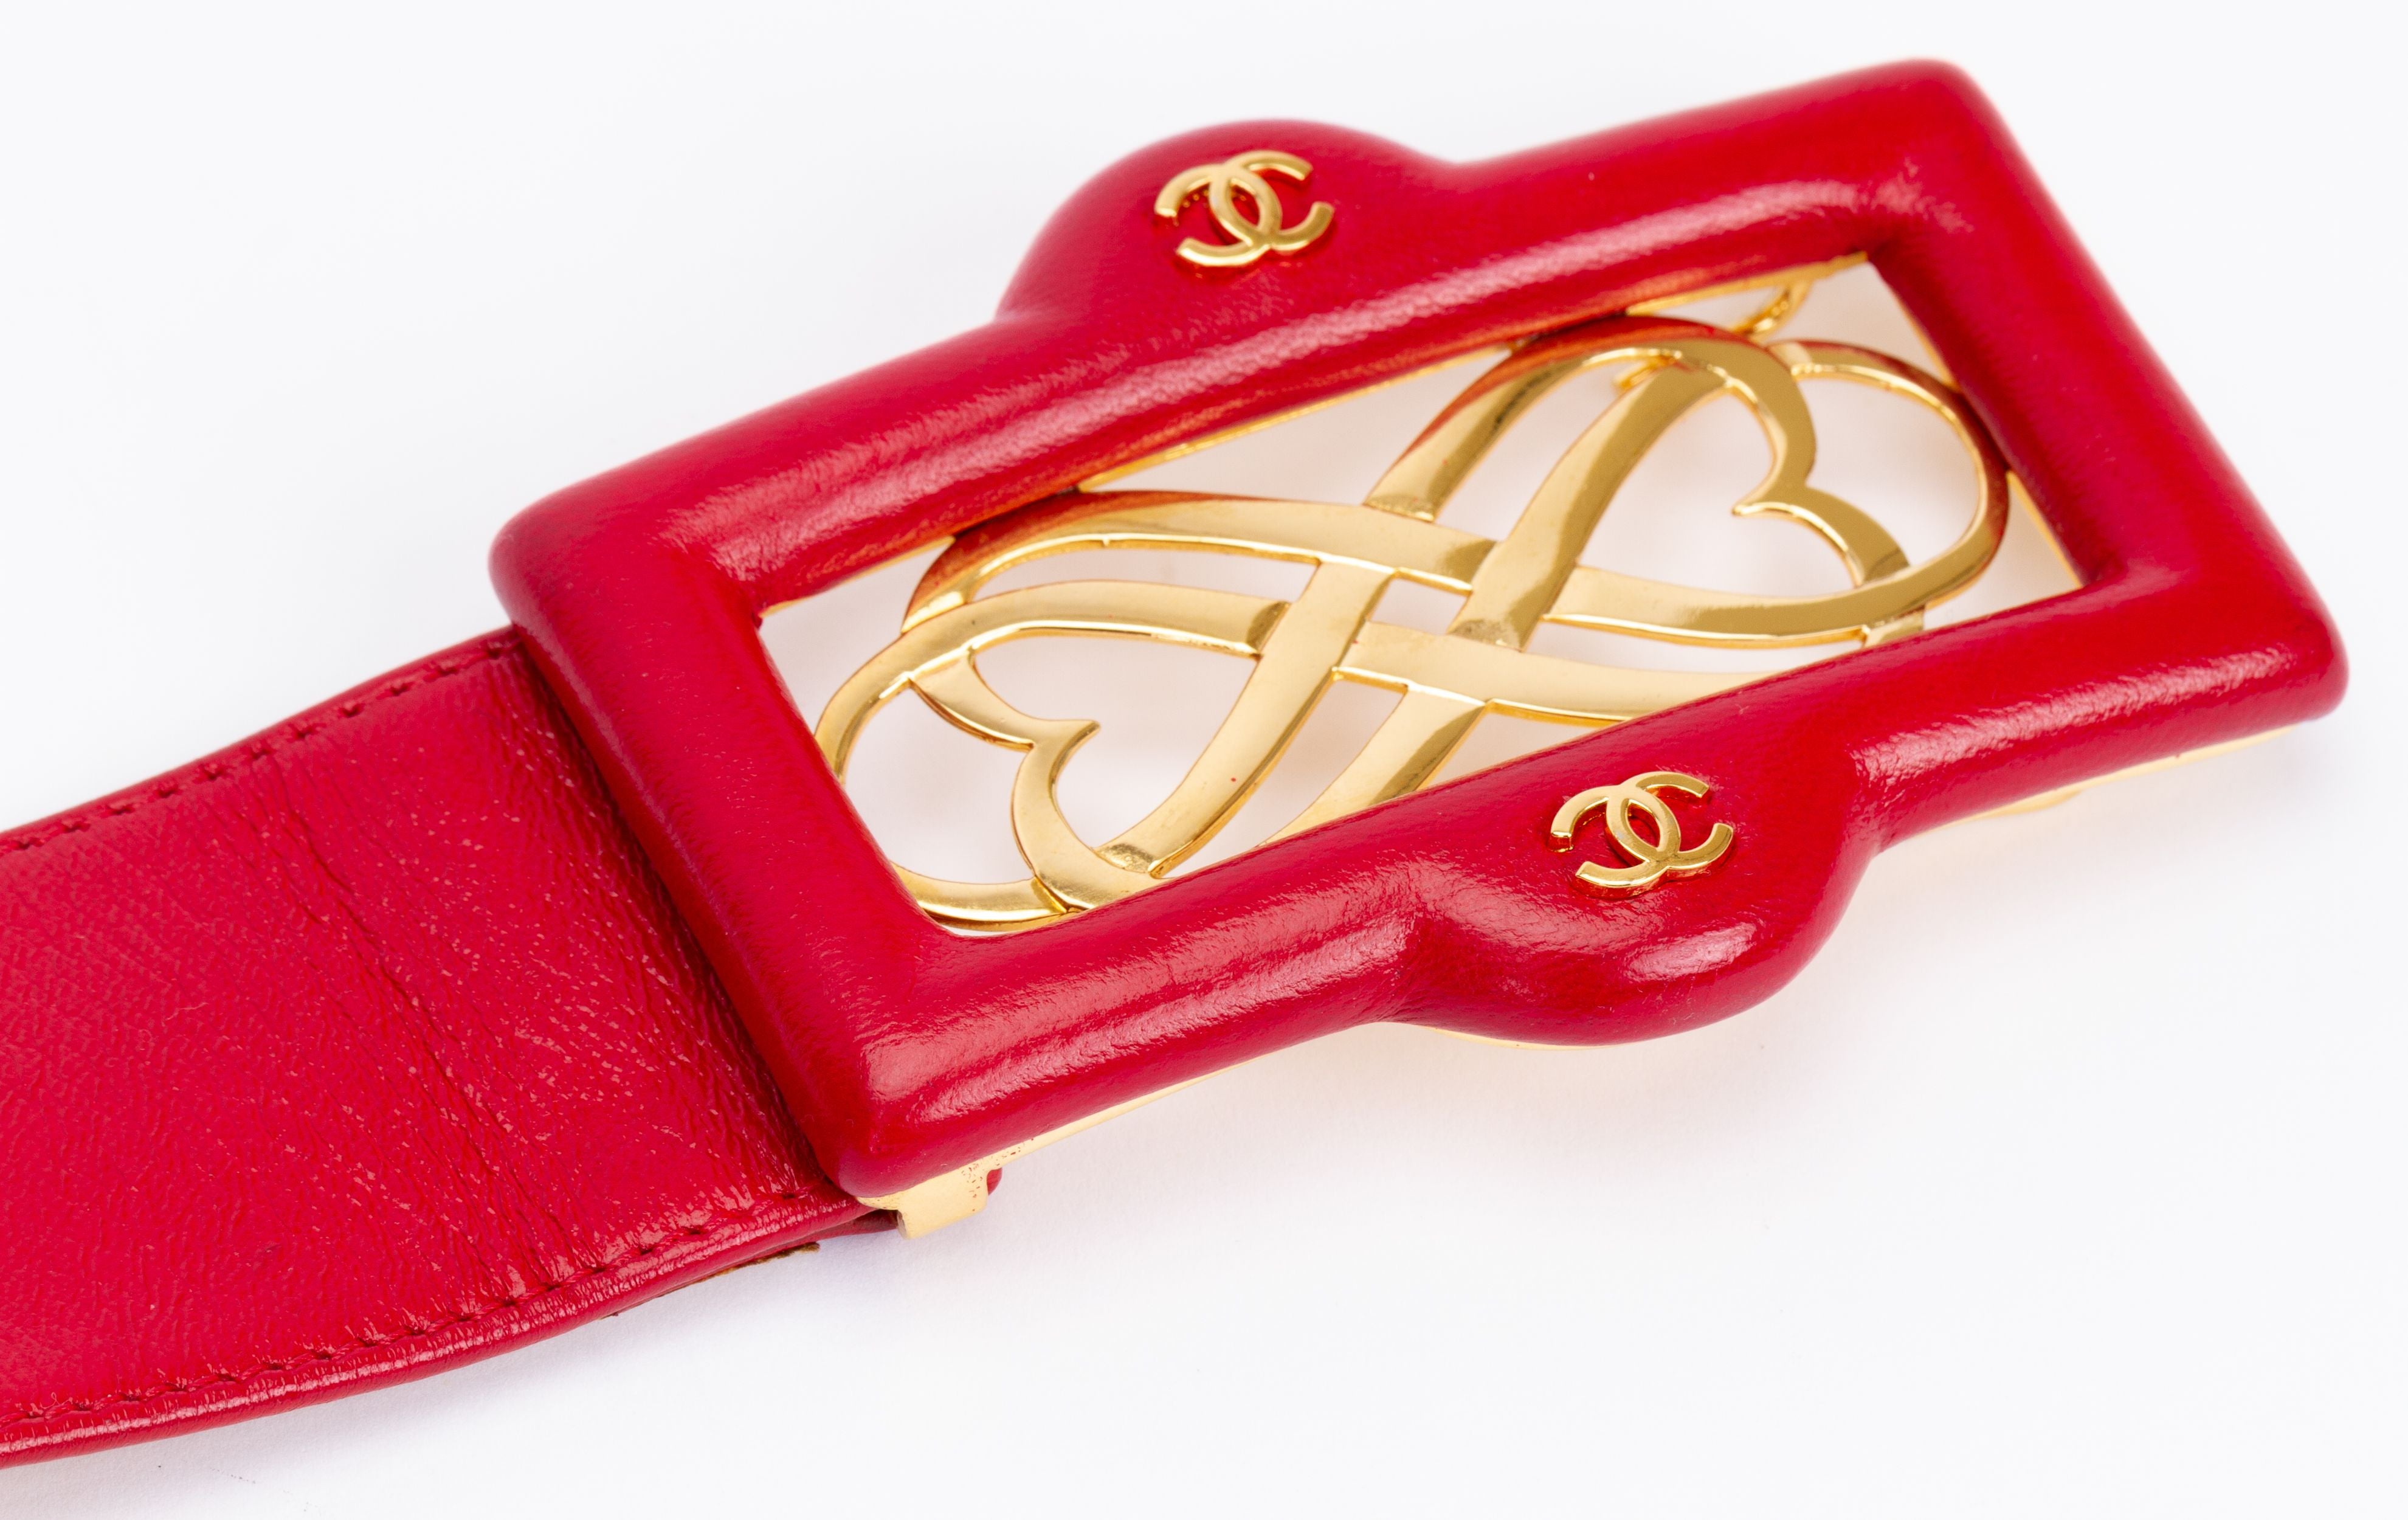 Chanel Red 80s Belt With Chain Drop - Vintage Lux